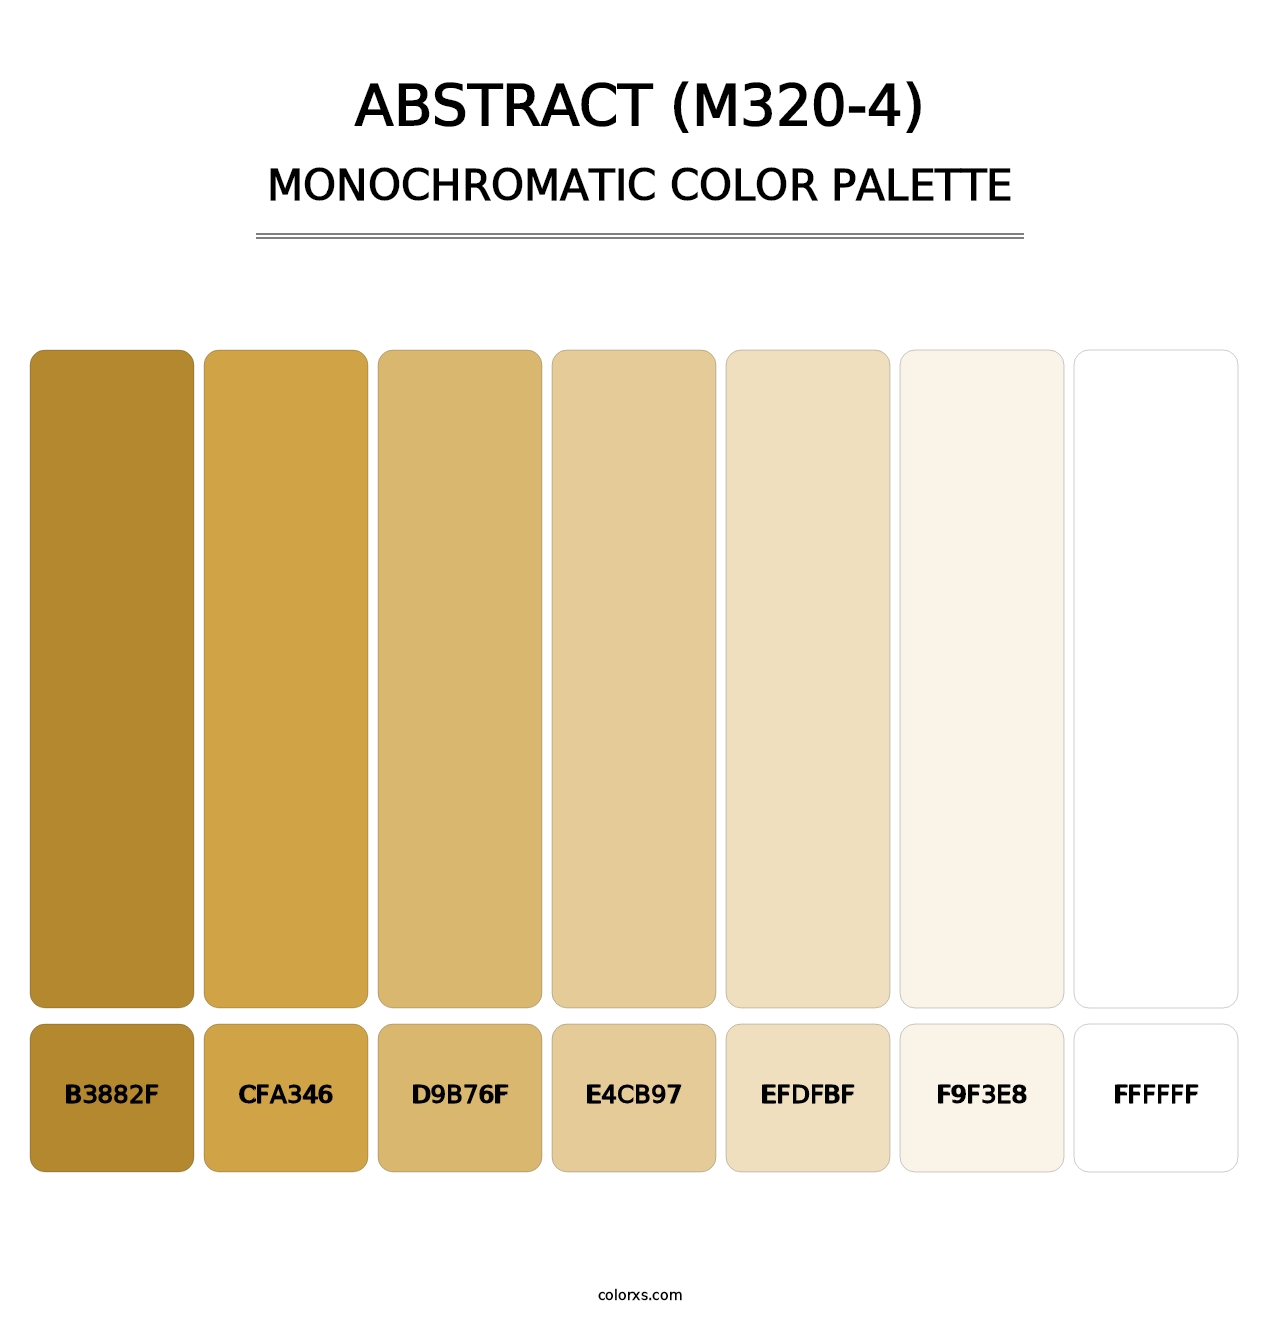 Abstract (M320-4) - Monochromatic Color Palette